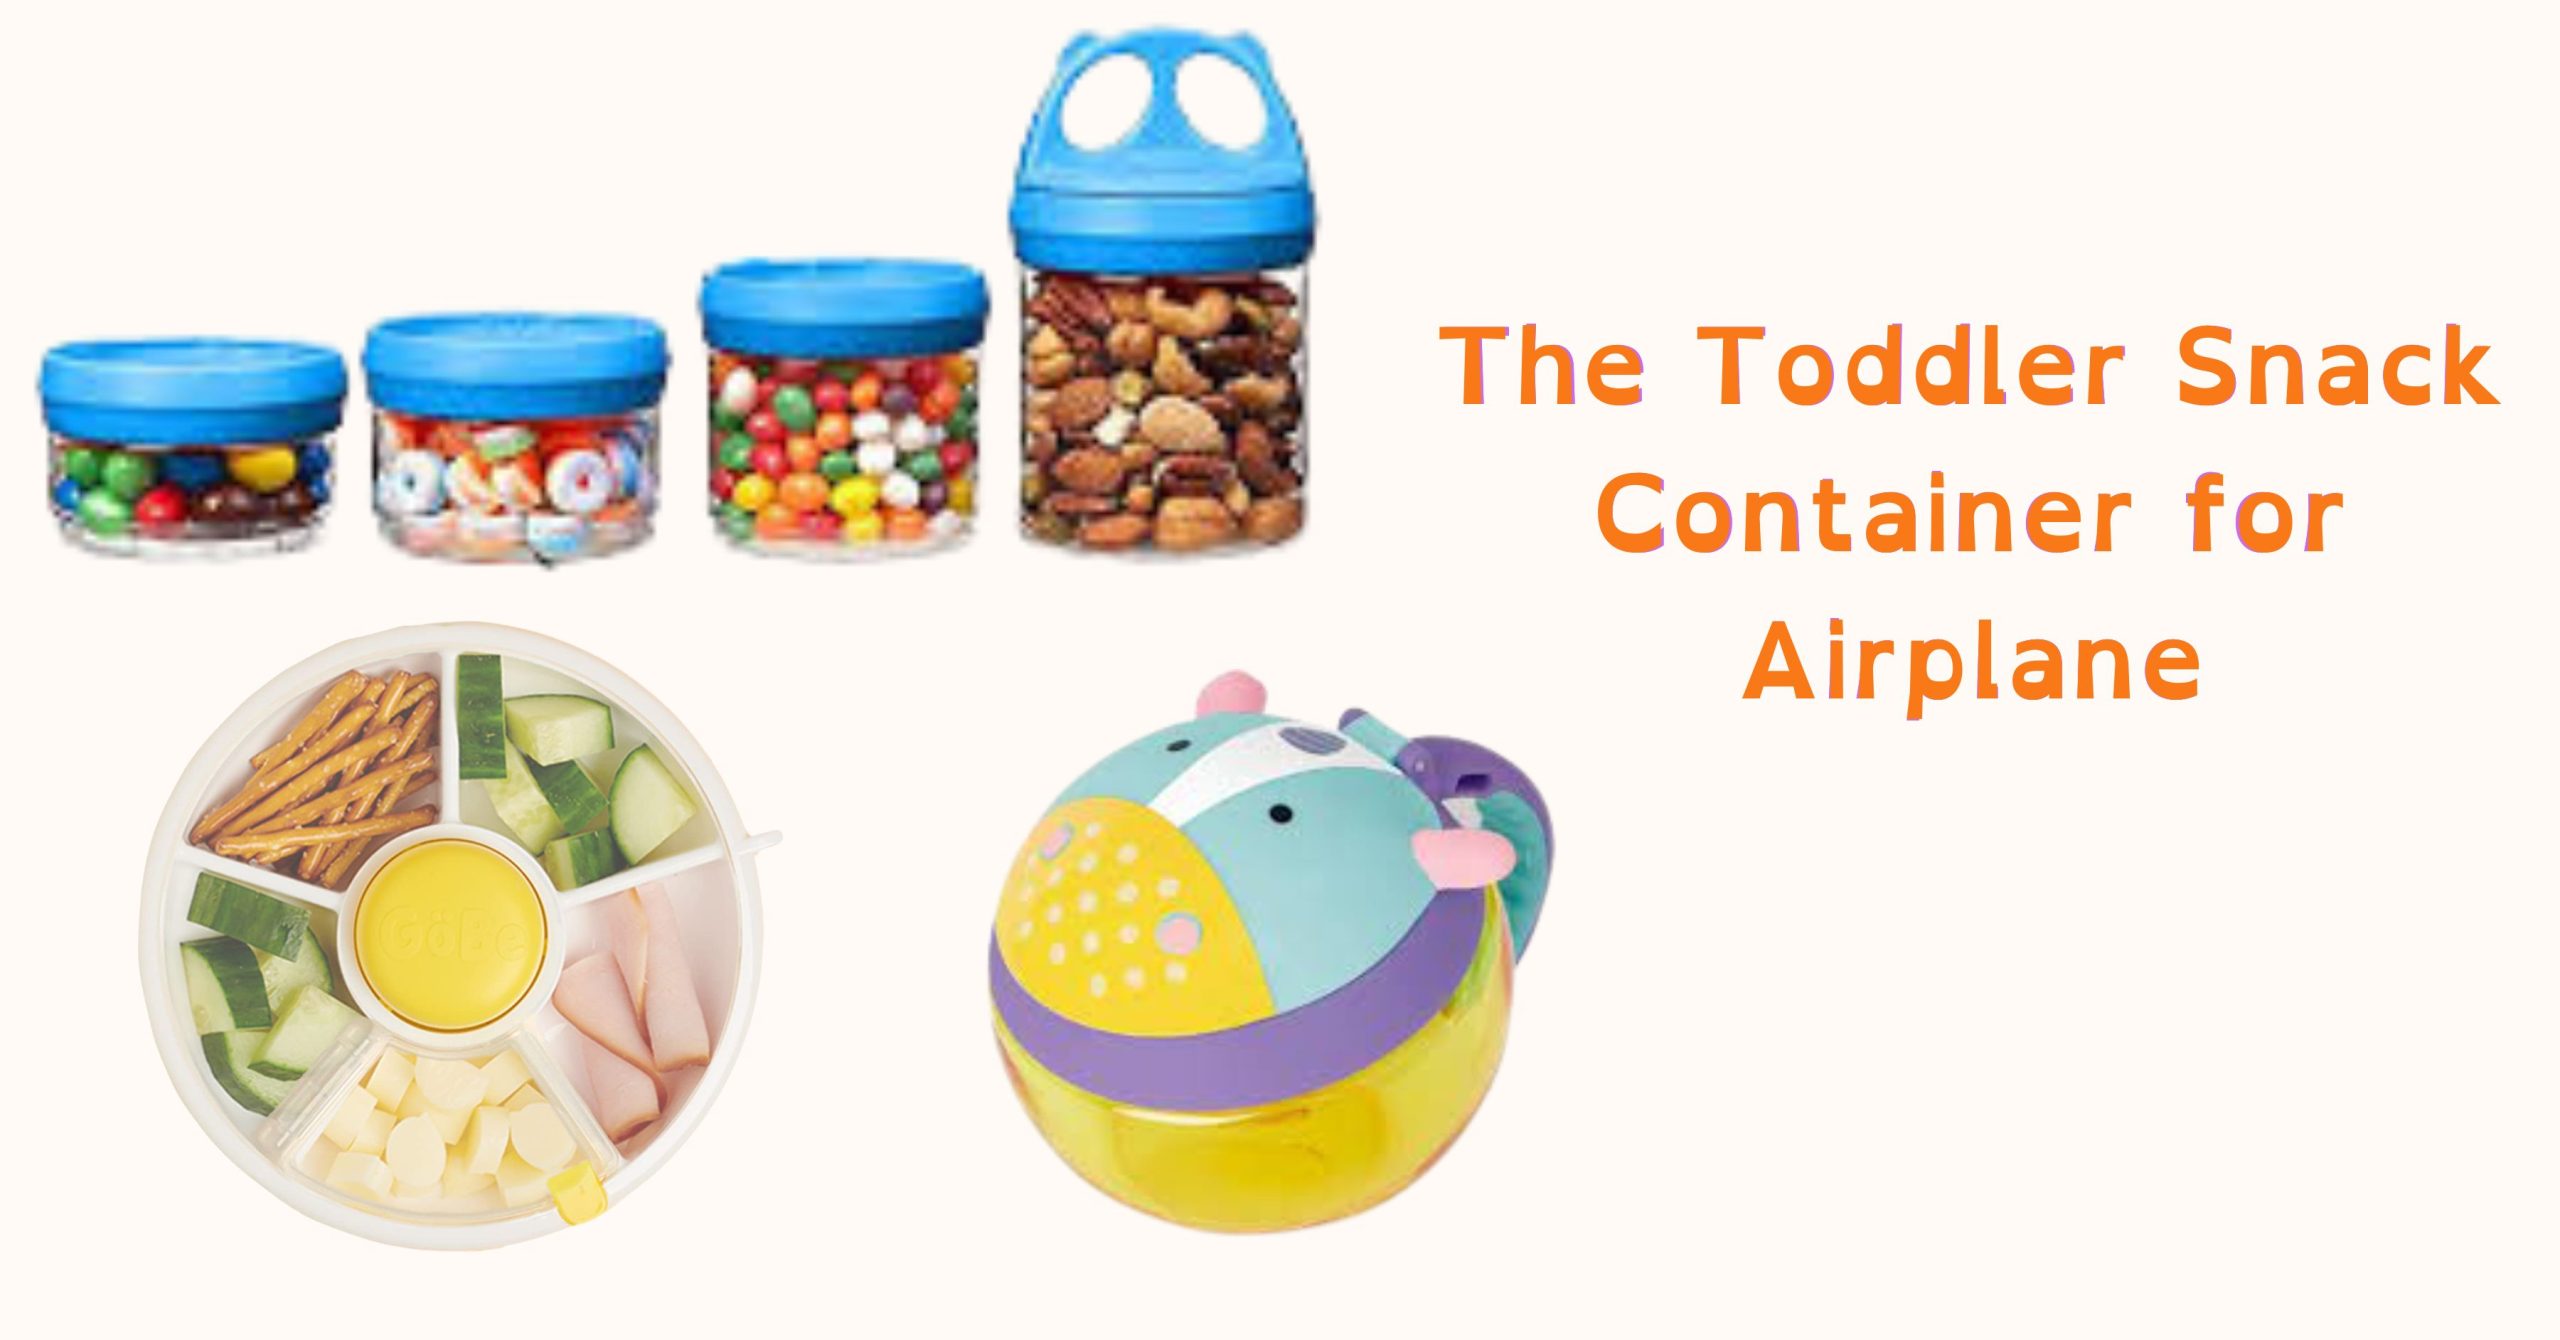 Boon Snug Toddler Snack Containers with Lids - Includes 2 Lids and